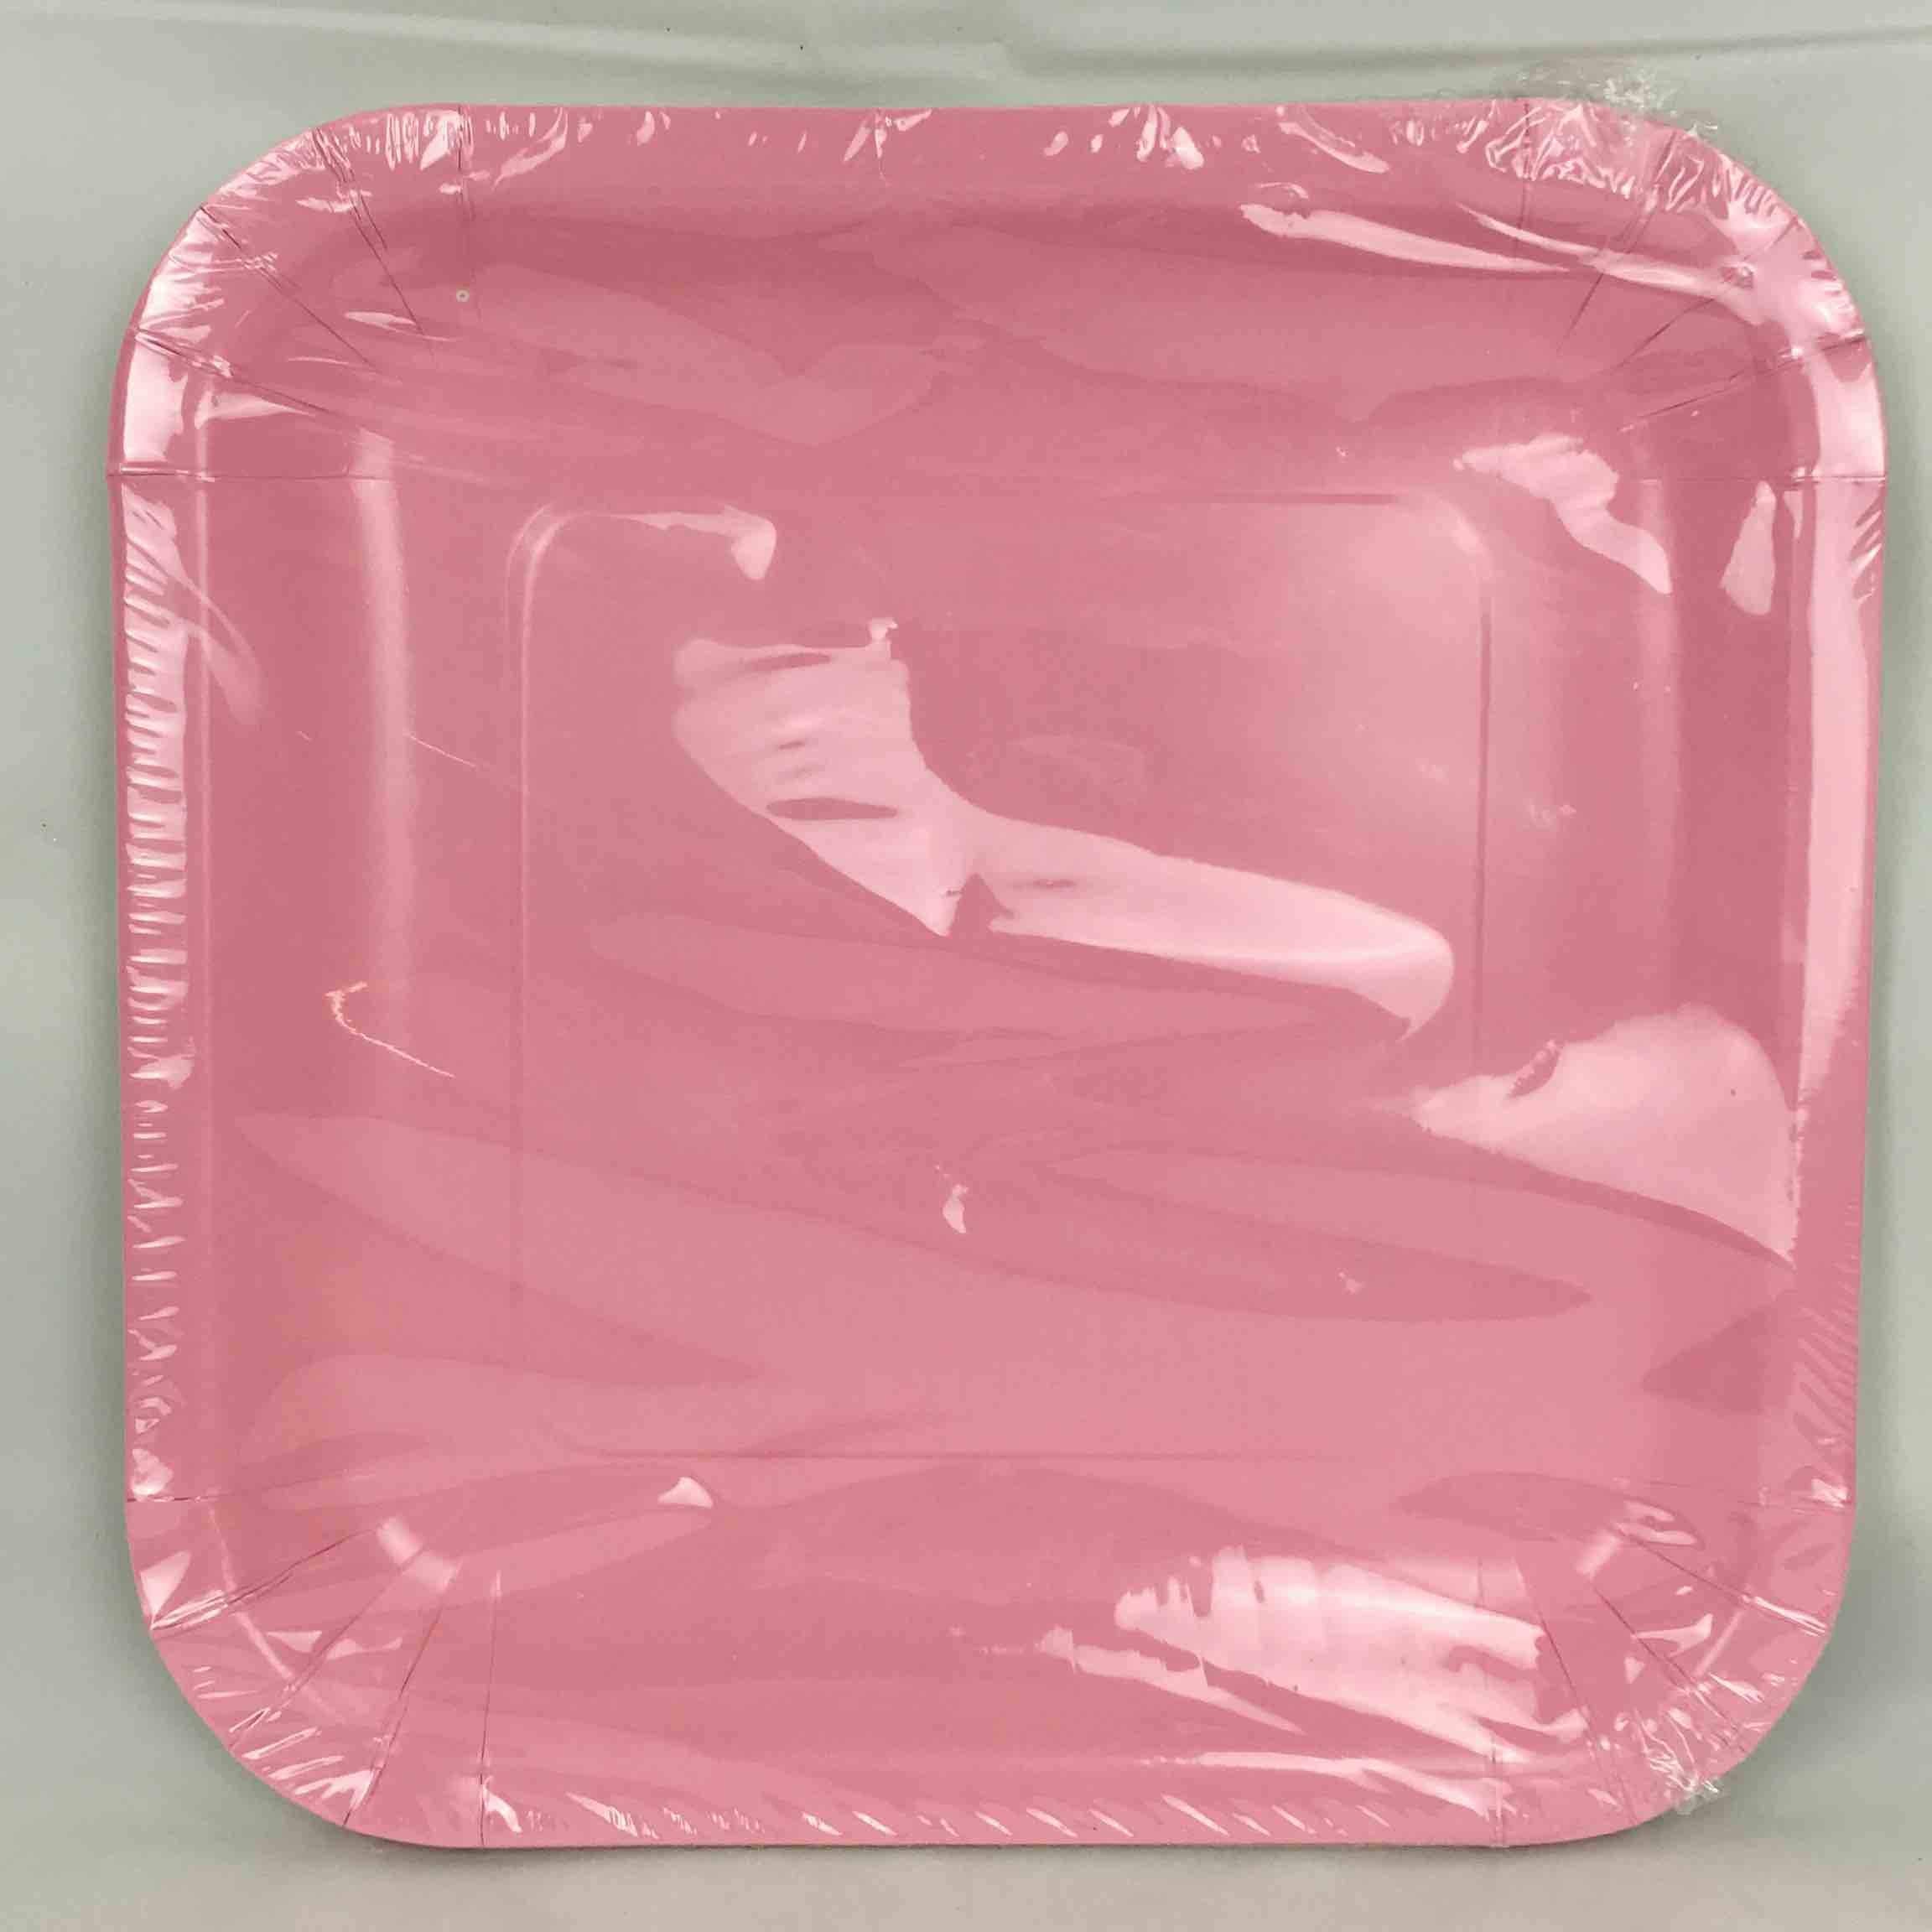 SOLID PASTEL PINK PLATES Square 9in  8pcs